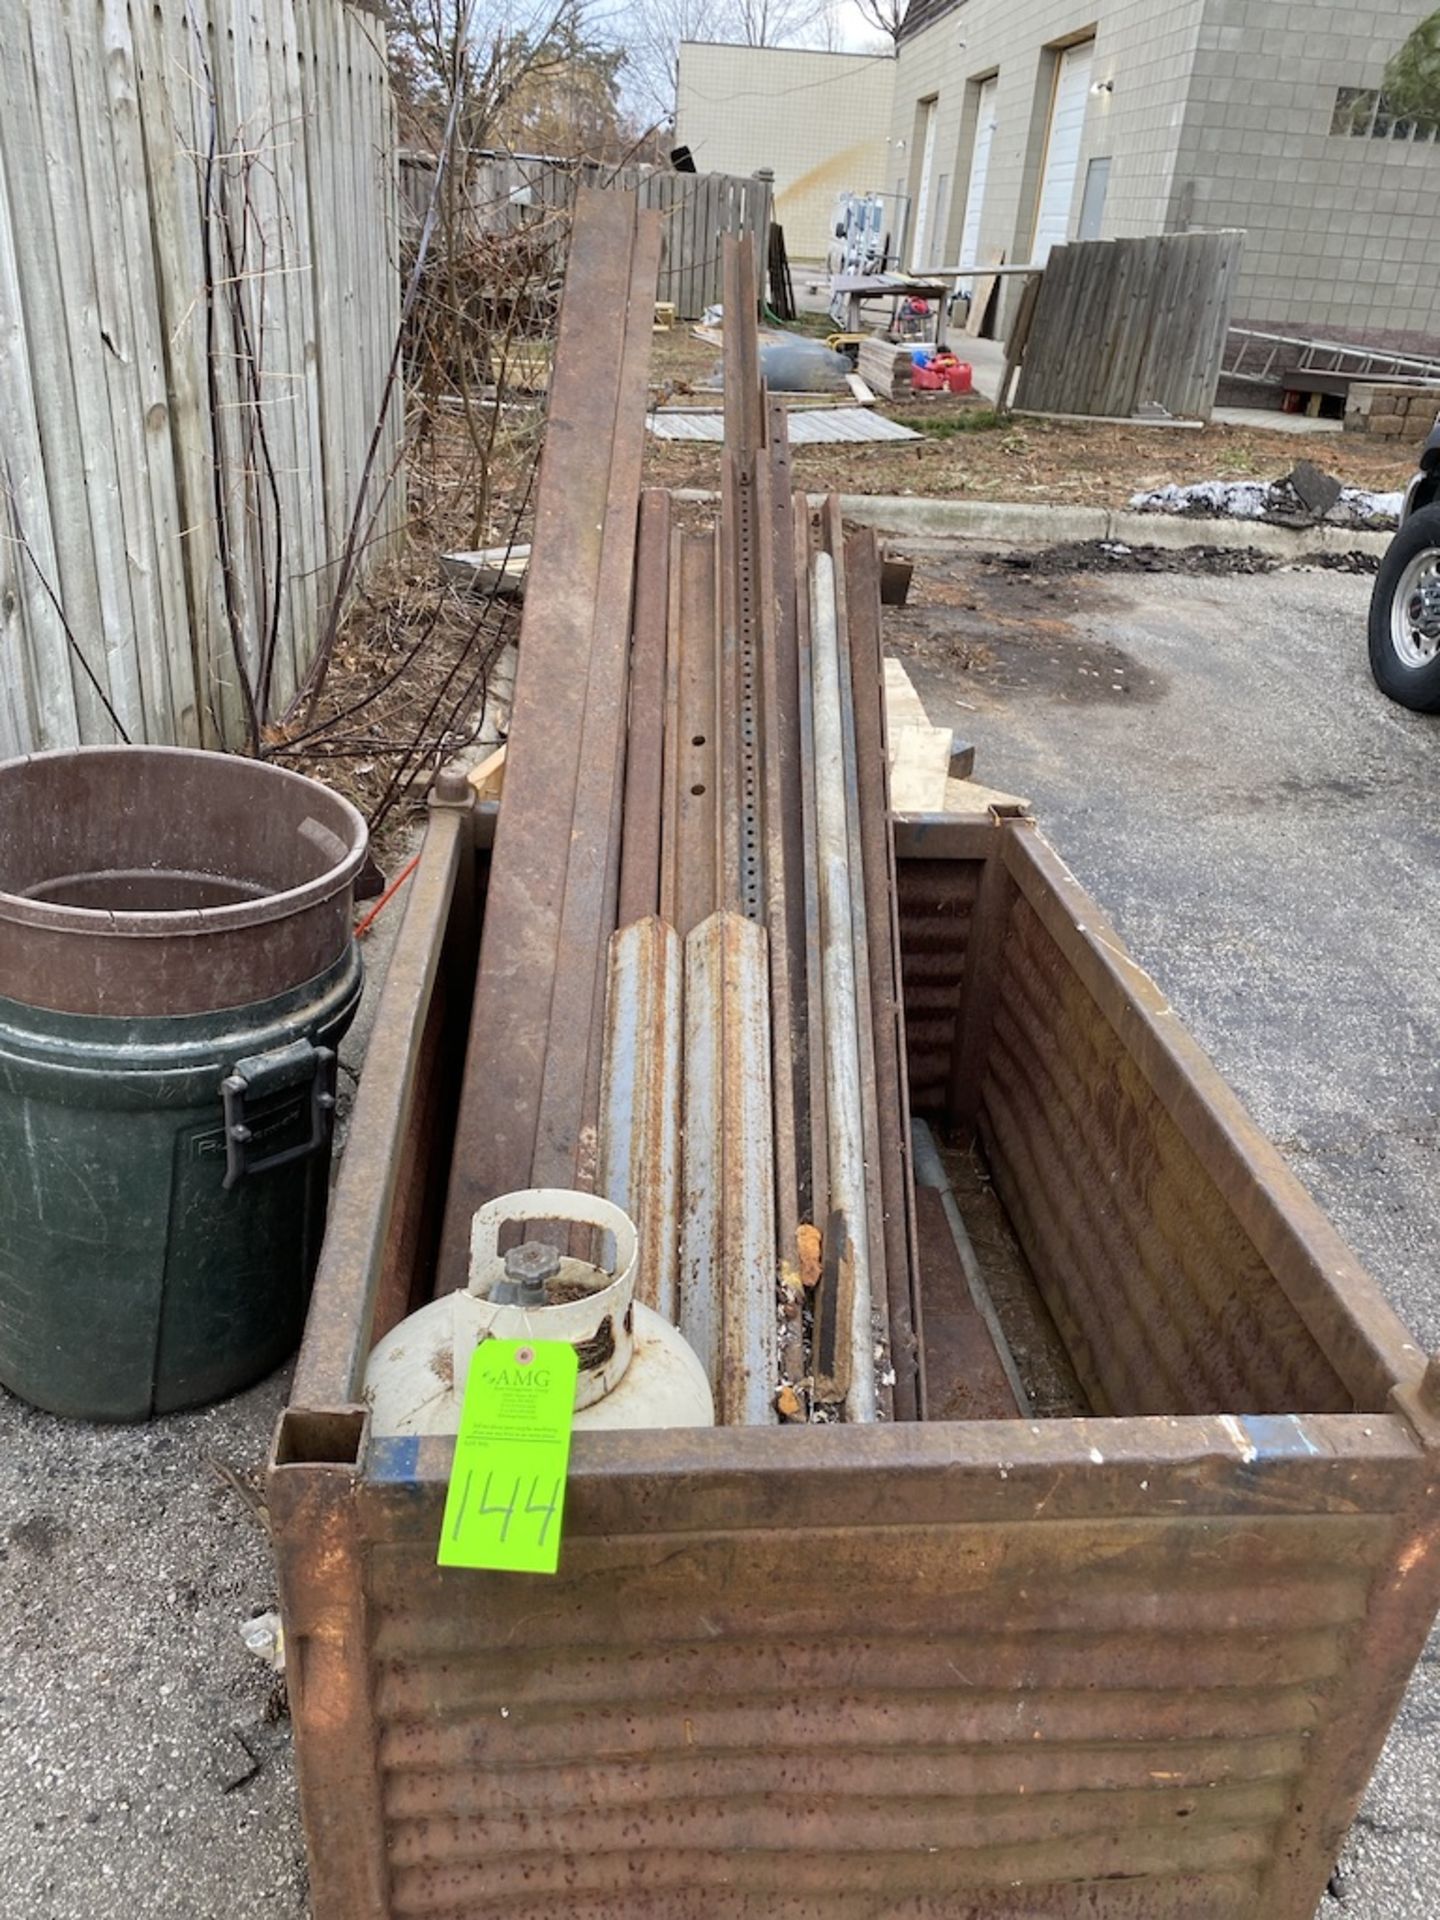 Lot of steel scrap and Tub in yard